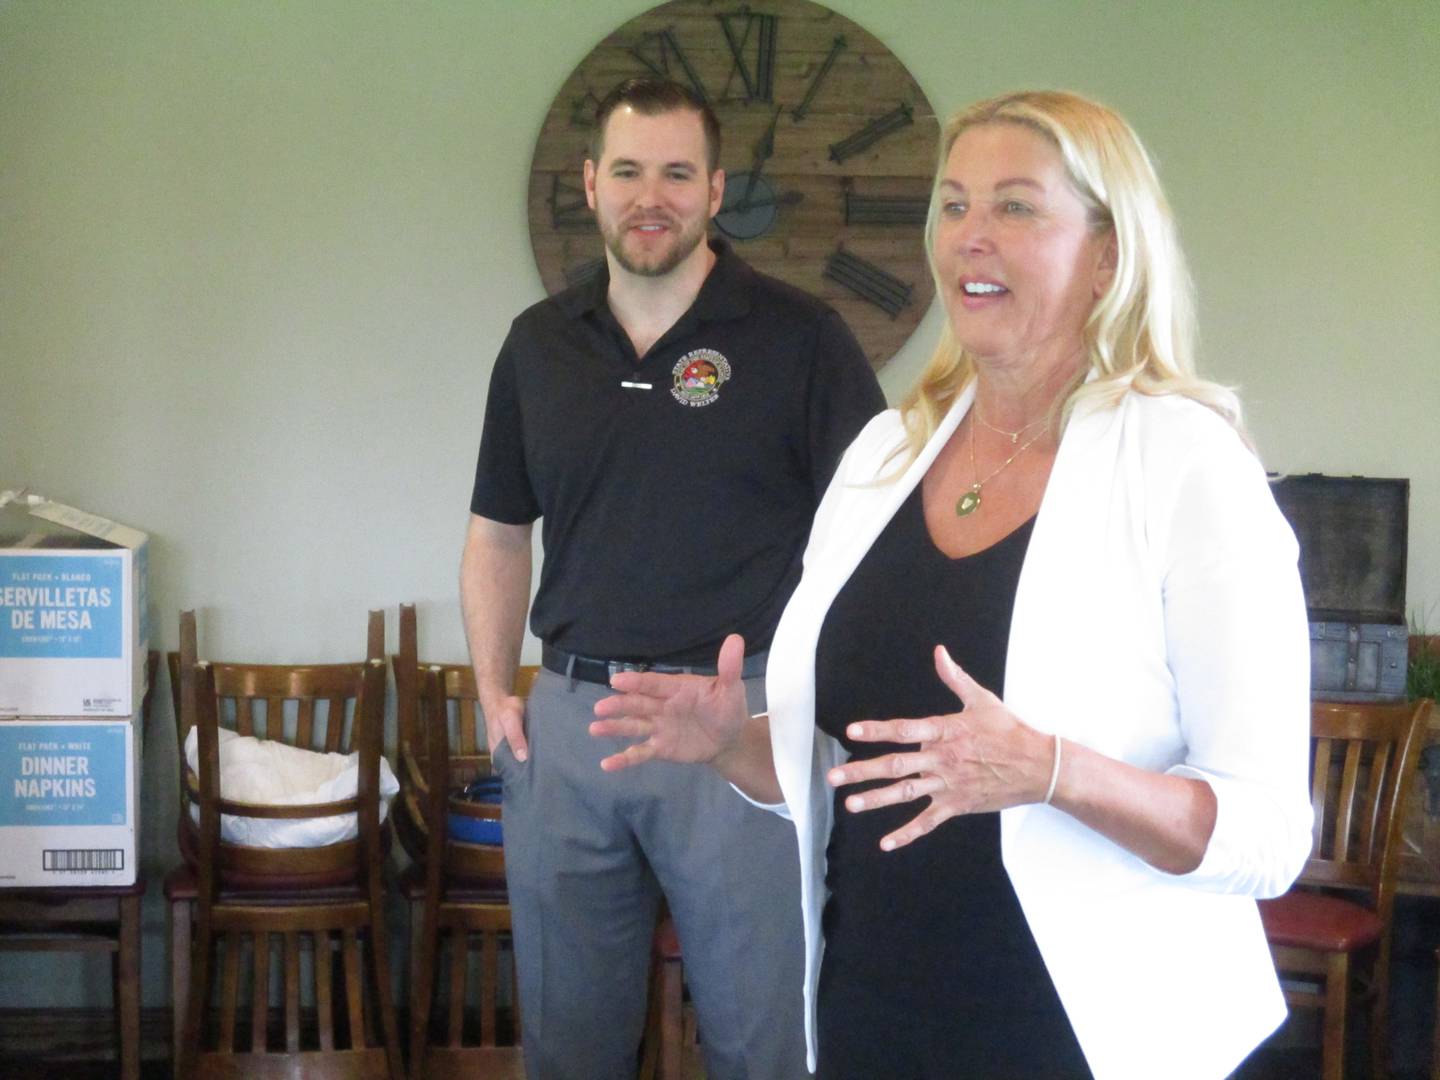 State Sen. Sue Rezin, R-Morris, speaks to the Yorkville Area Chamber of Commerce as state Rep. David Welter, R-Morris, listens, on May 10, 2022 at Kennedy Pointe Restaurant and Pub. (Mark Foster -- mfoster@shawmedia.com)